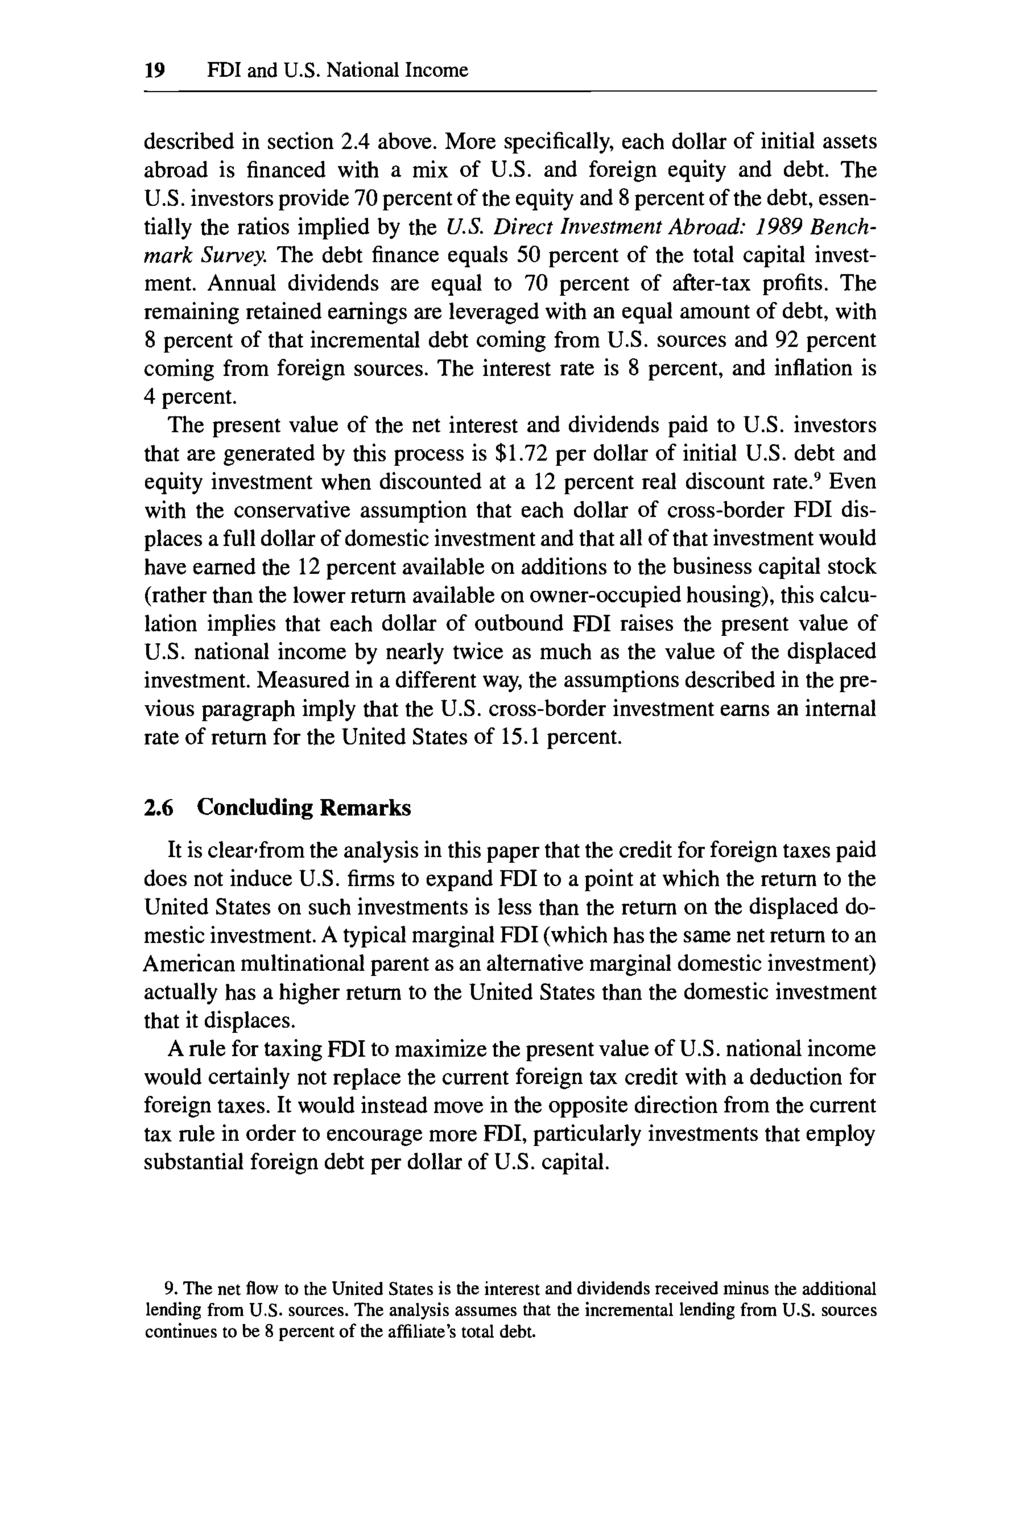 19 FDI and U.S. National Income described in section 2.4 above. More specifically, each dollar of initial assets abroad is financed with a mix of U.S. and foreign equity and debt. The U.S. investors provide 70 percent of the equity and 8 percent of the debt, essentially the ratios implied by the U.